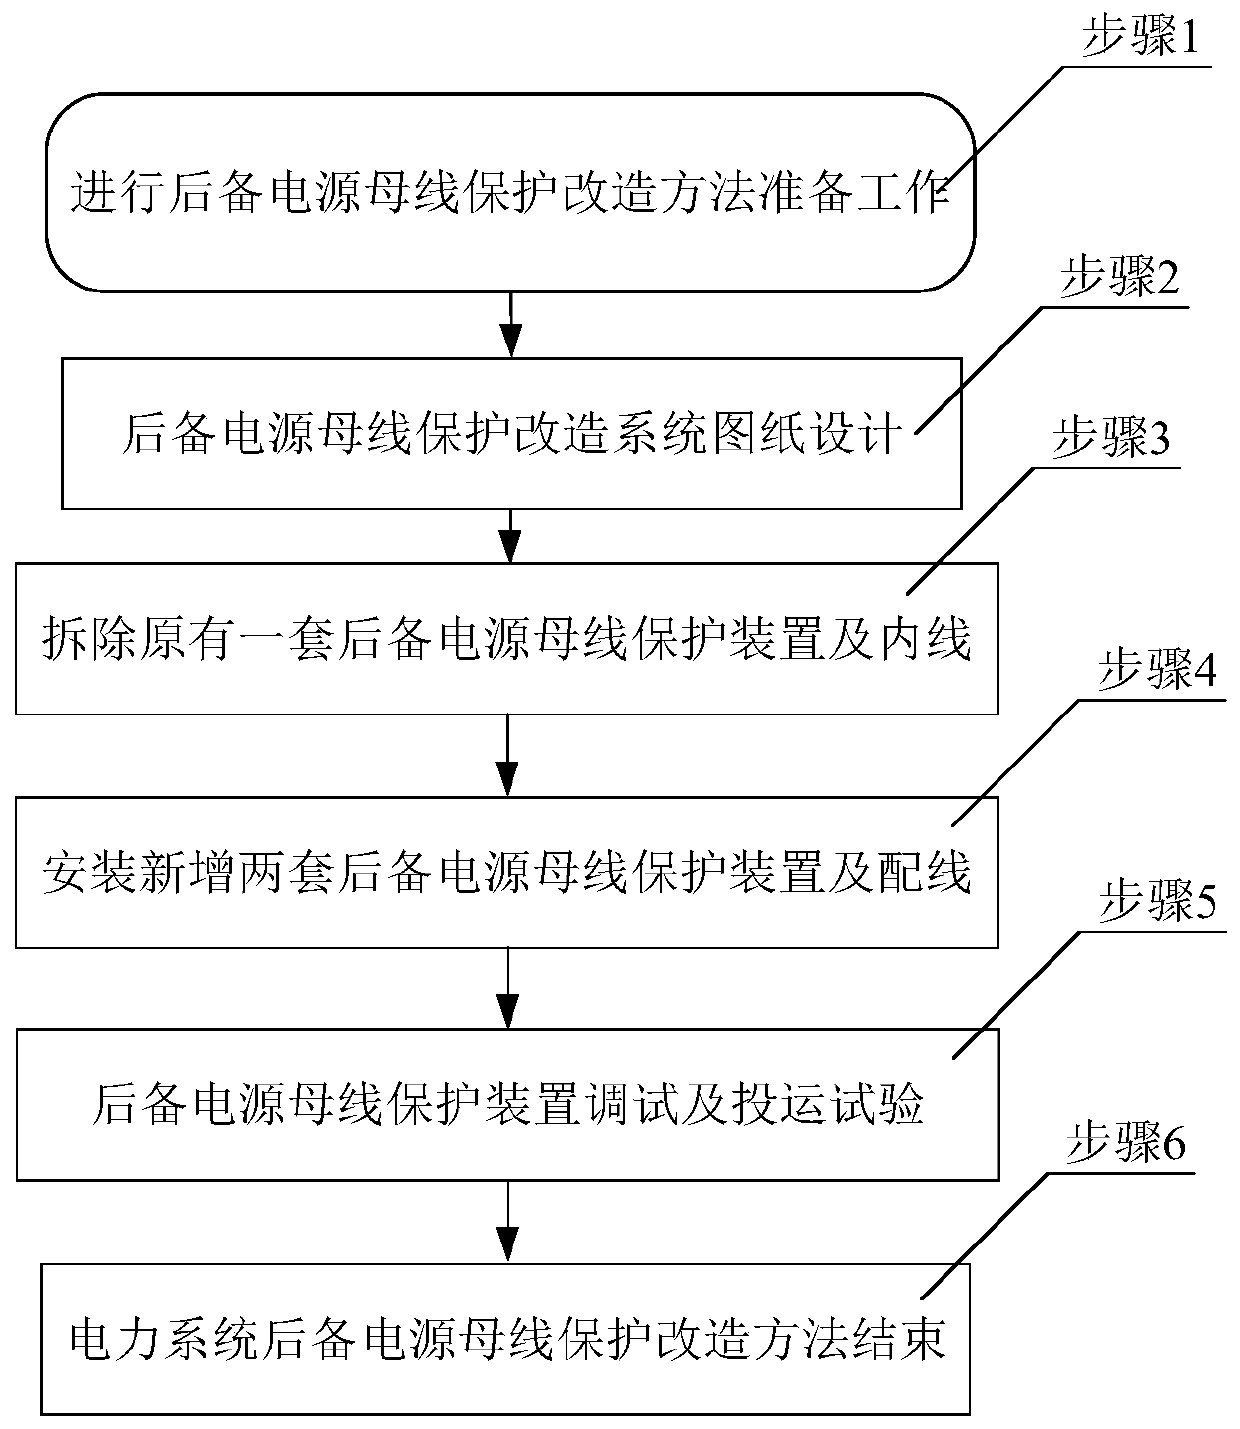 Backup power supply bus protection transformation system and method thereof for electric power system